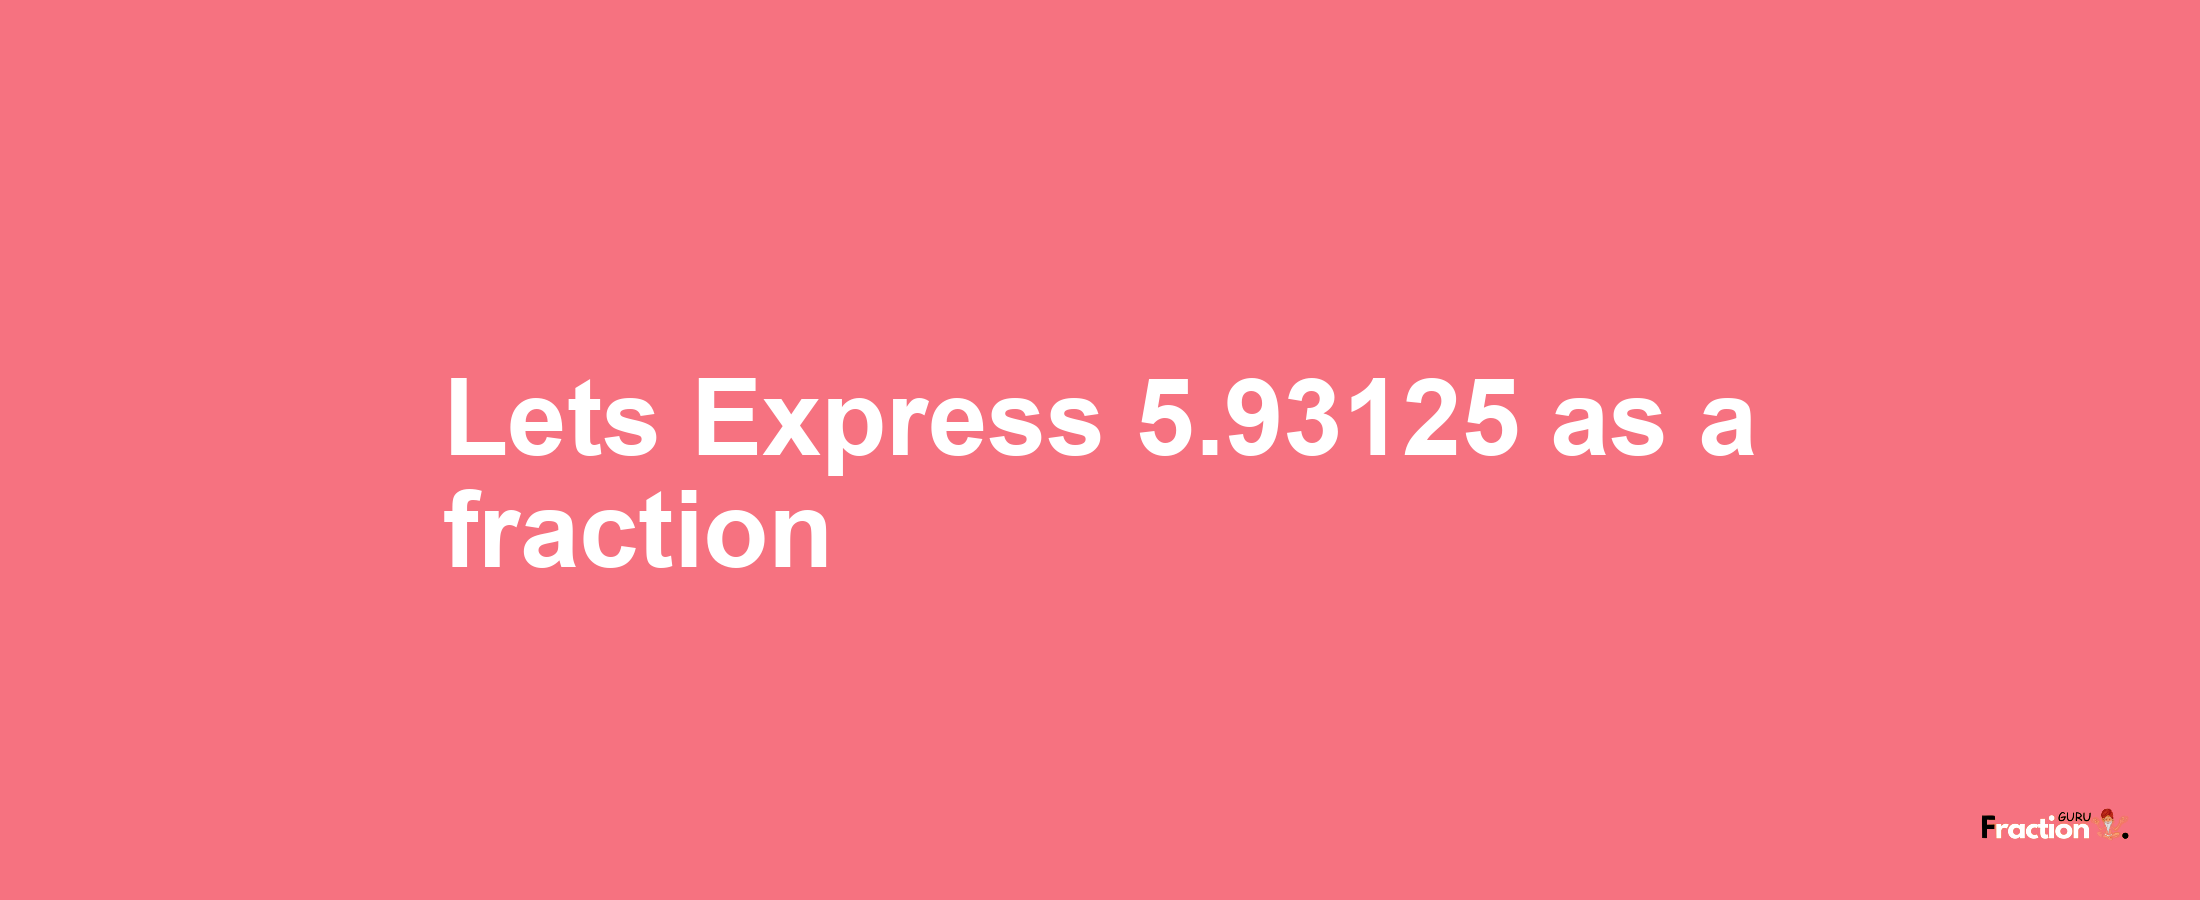 Lets Express 5.93125 as afraction